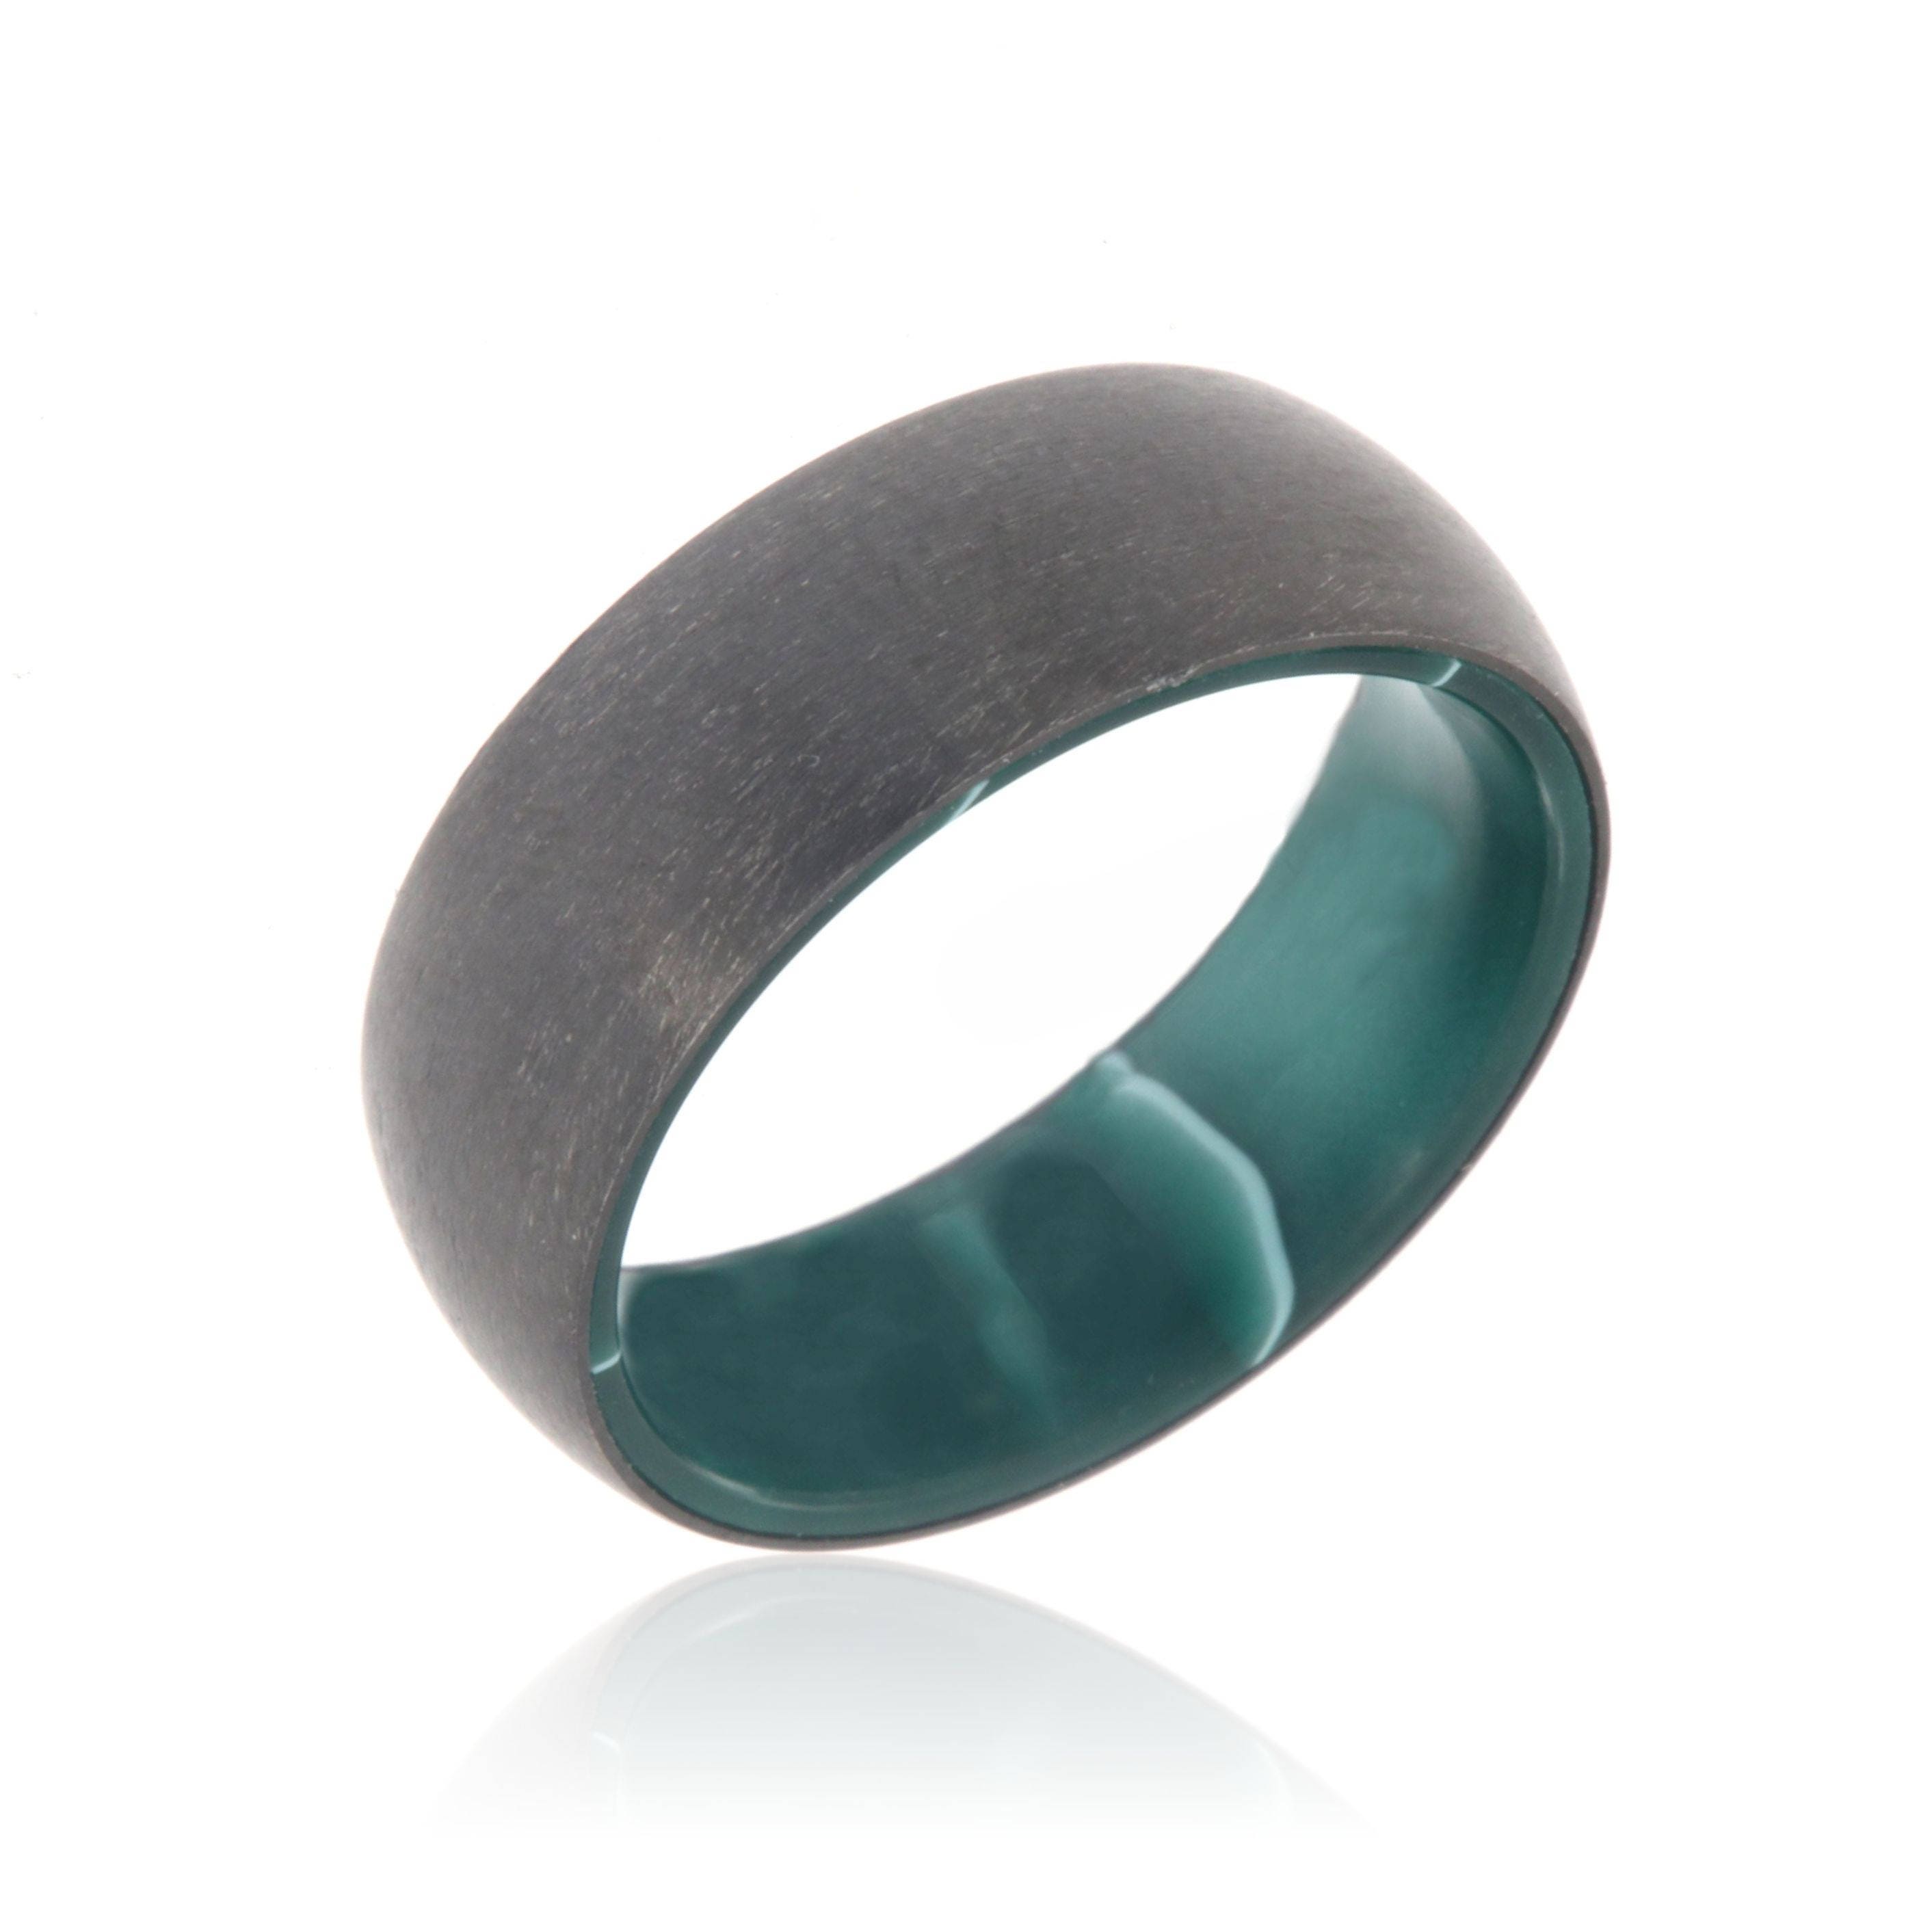 Black Zirconium and Green Emerald Resin Sleeve 8mm Wide Ring - USA Made Custom Jewelry and Bands